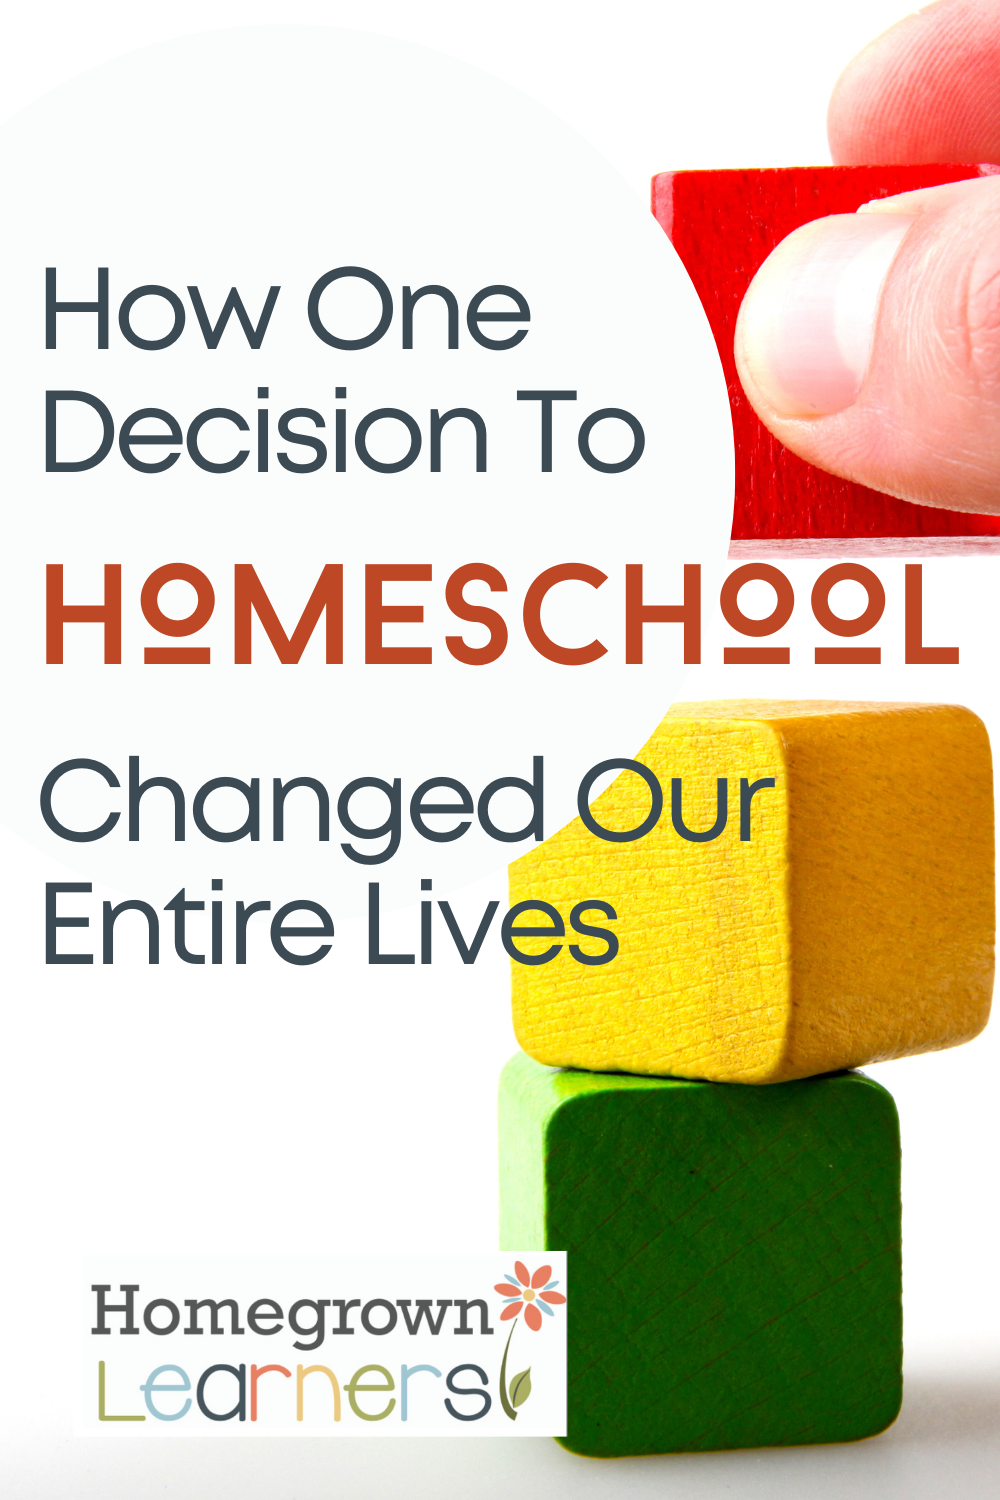 How One Decision to Homeschool Changed Everything